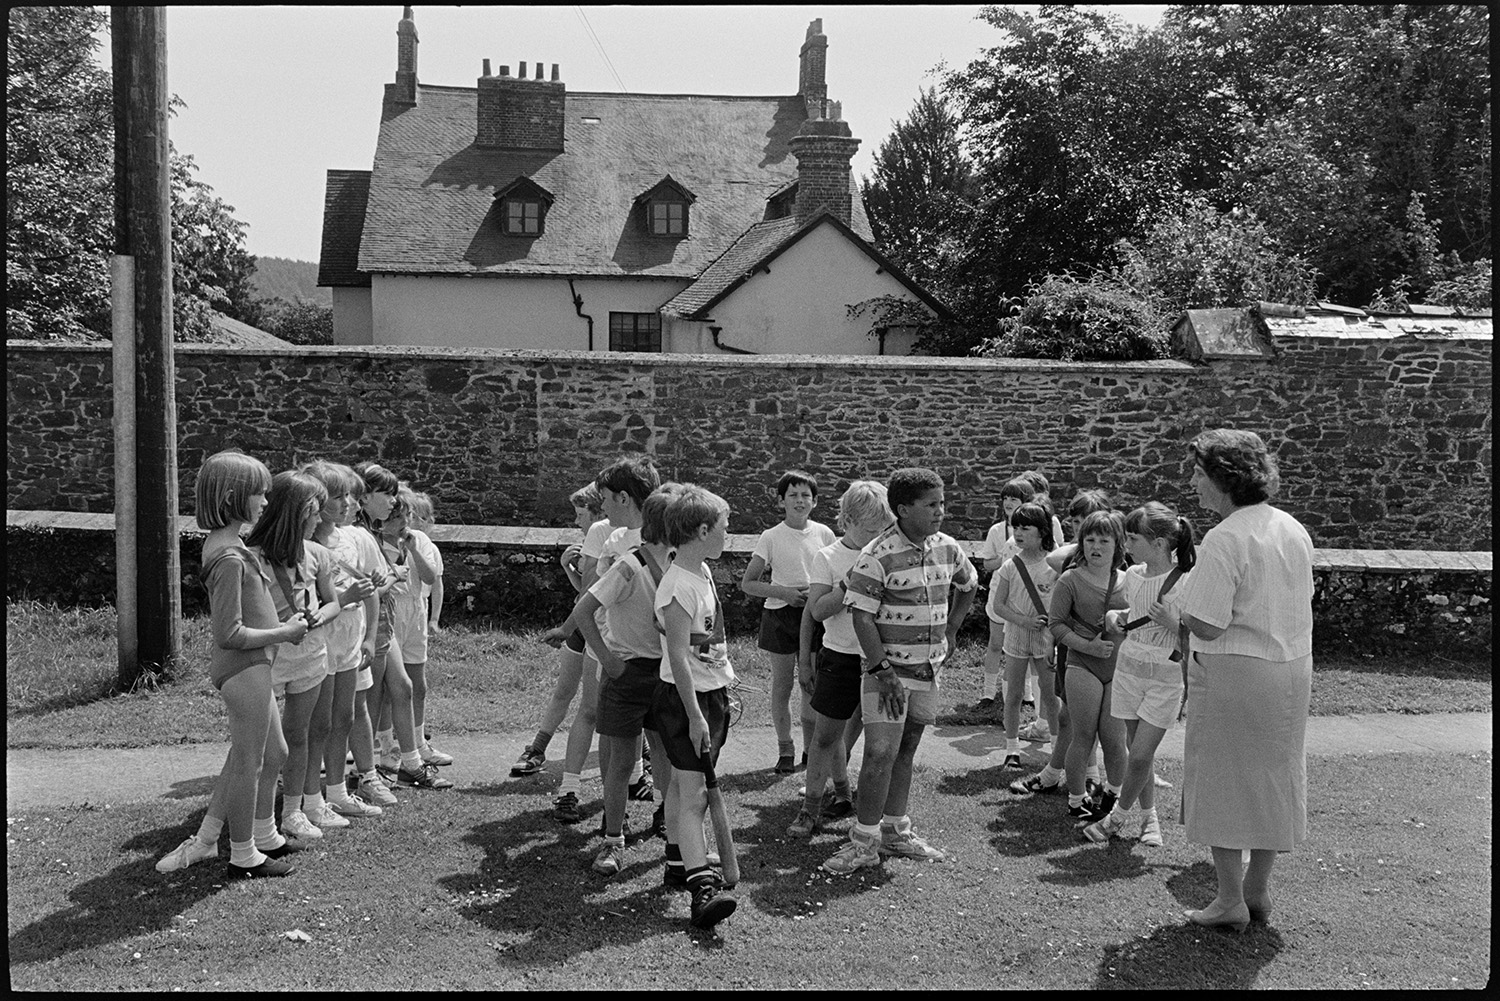 Children going through park to play rounders.
[Jean Harris, a teacher at Chulmleigh Primary School, with children lining up for games of rounders in Chulmleigh park. One child is holding a bat.]